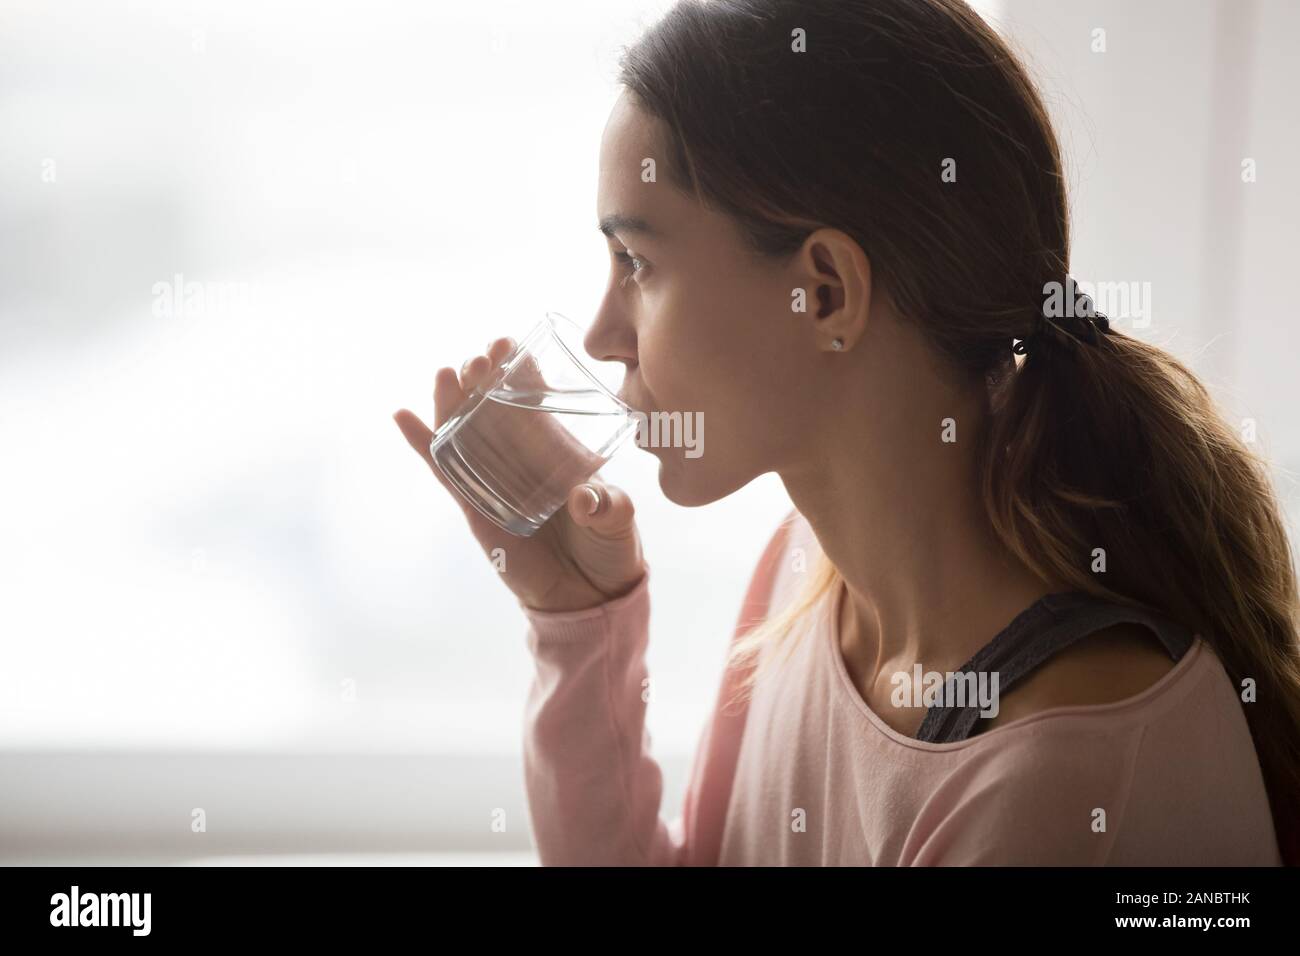 Millennial multiethnic girl drinking glass of pure water. Stock Photo